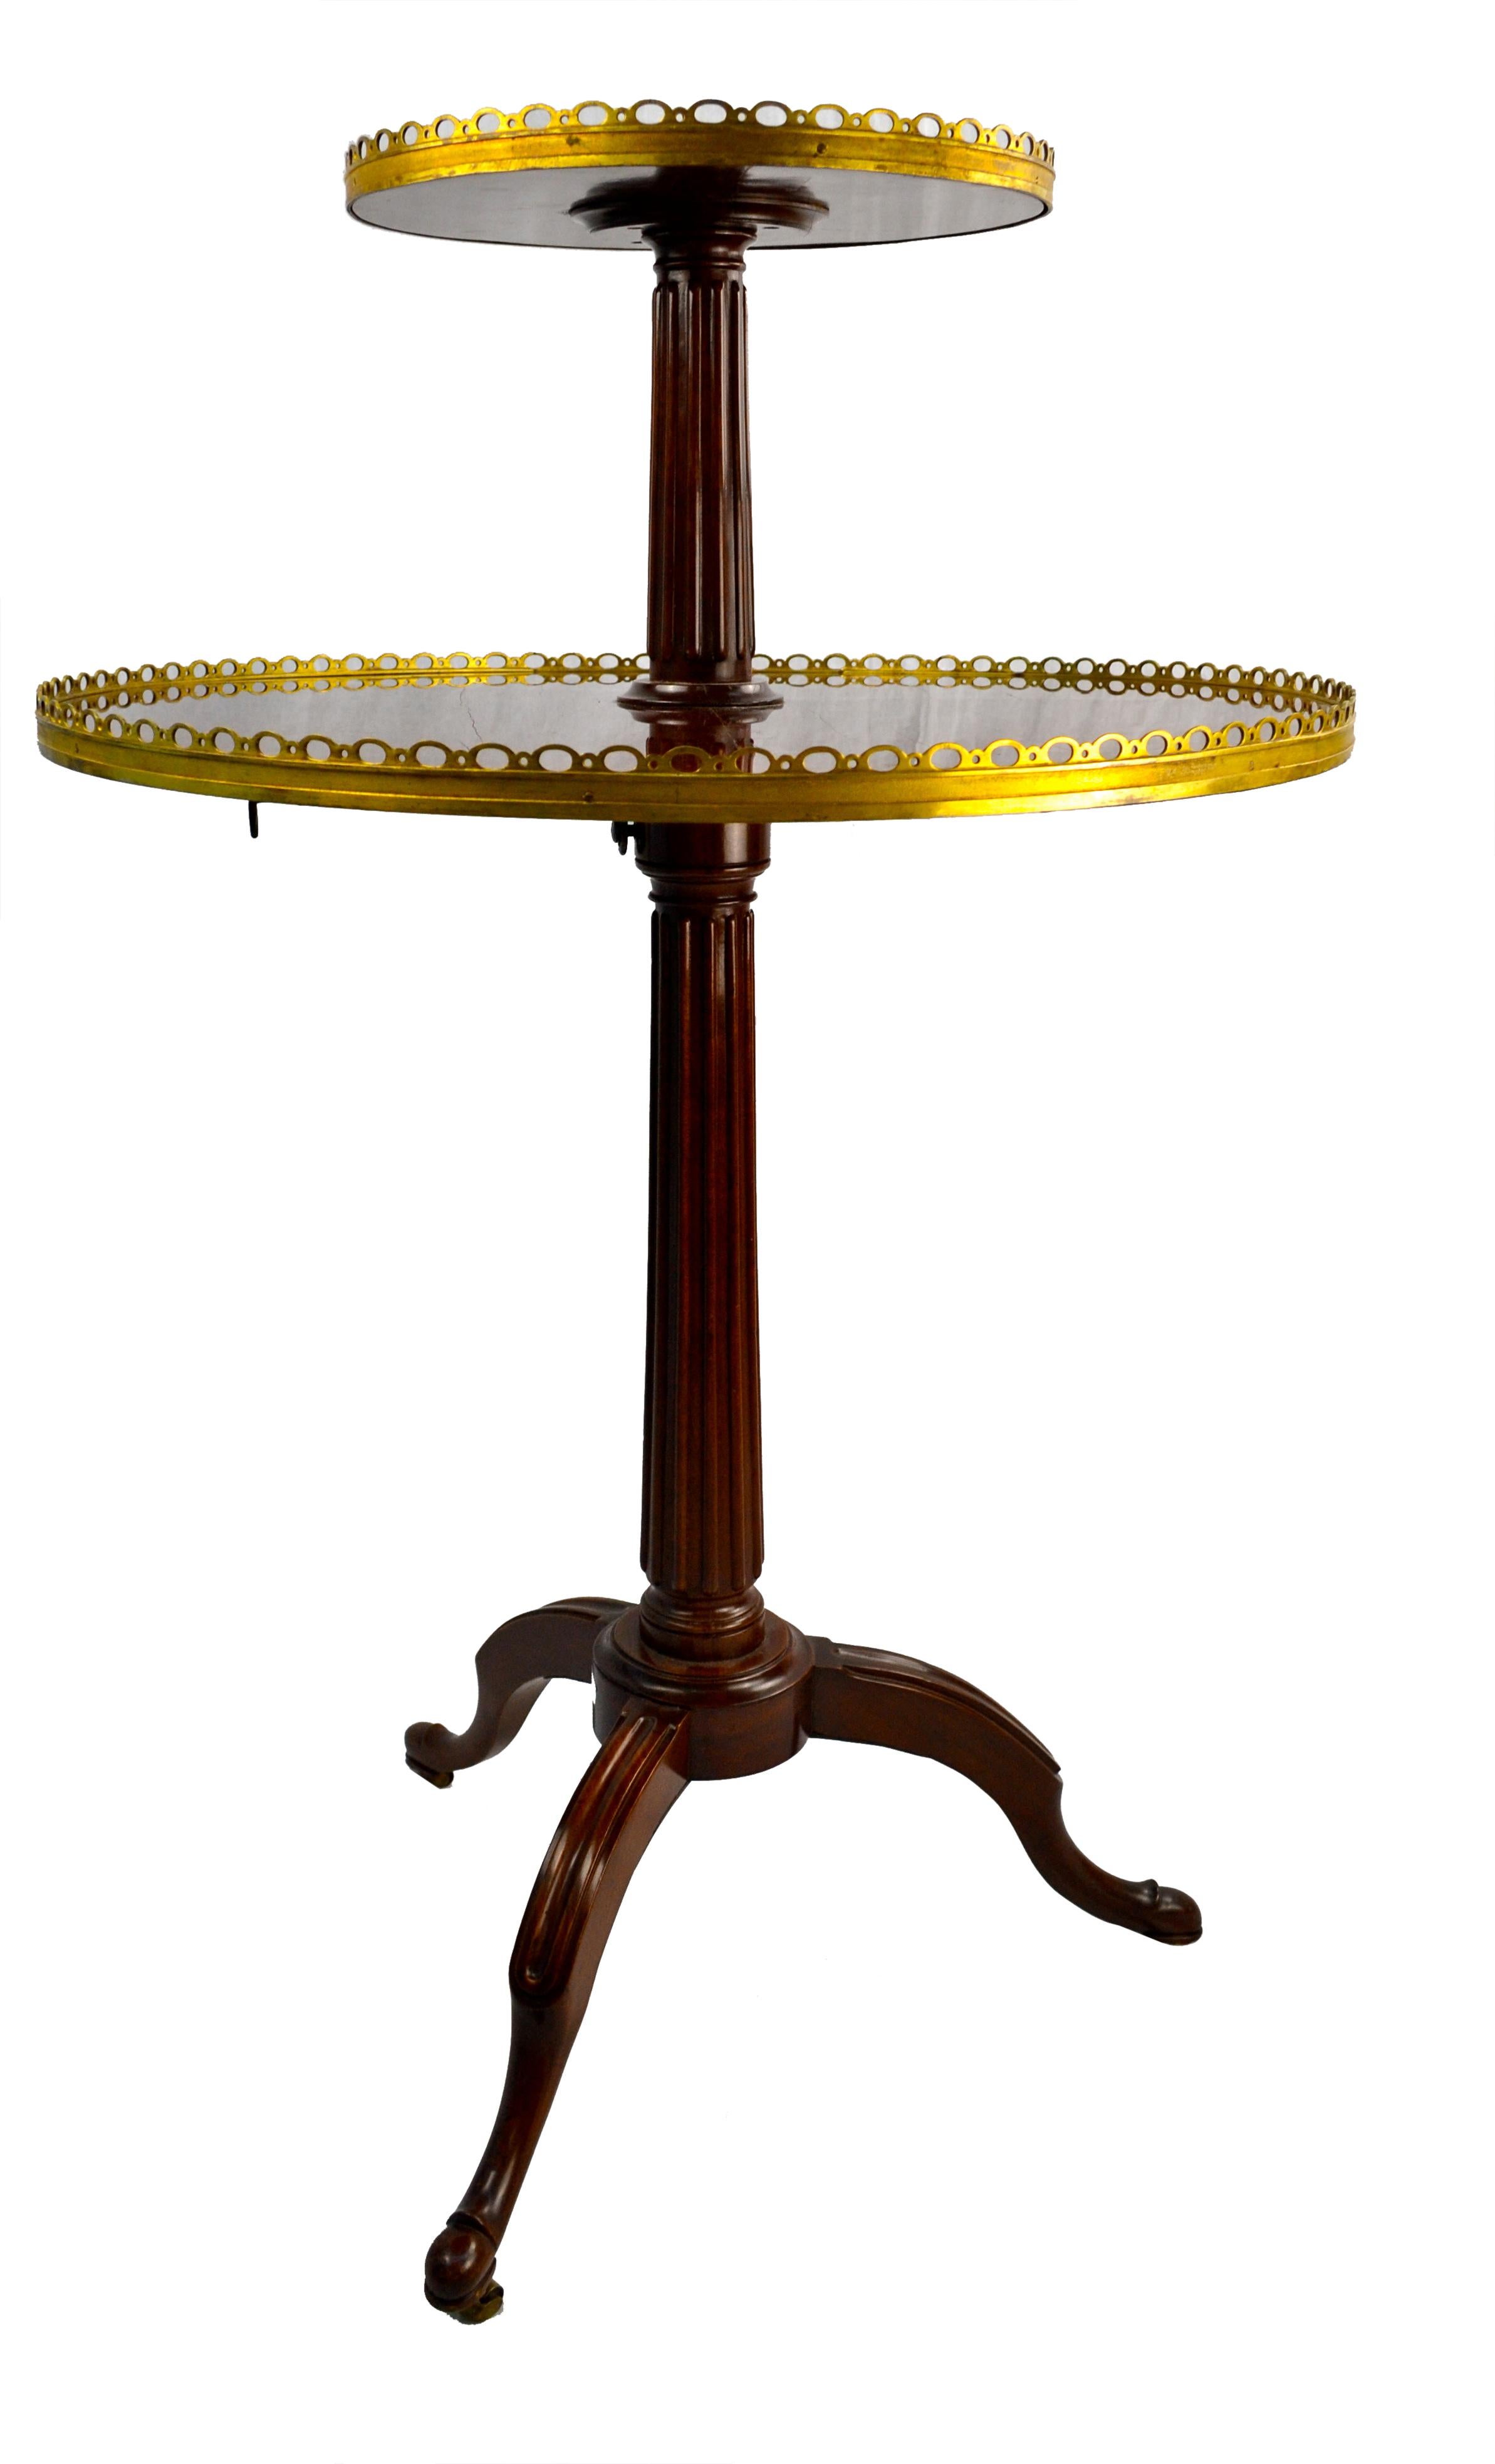 A late 18th century Louis XVI desert table or as is often referred to a ‘dumb-waiter’ in mahogany with gilt metal galleries; the top tier is adjustable in height; the fluted central column resting on three splayed legs with original castors.